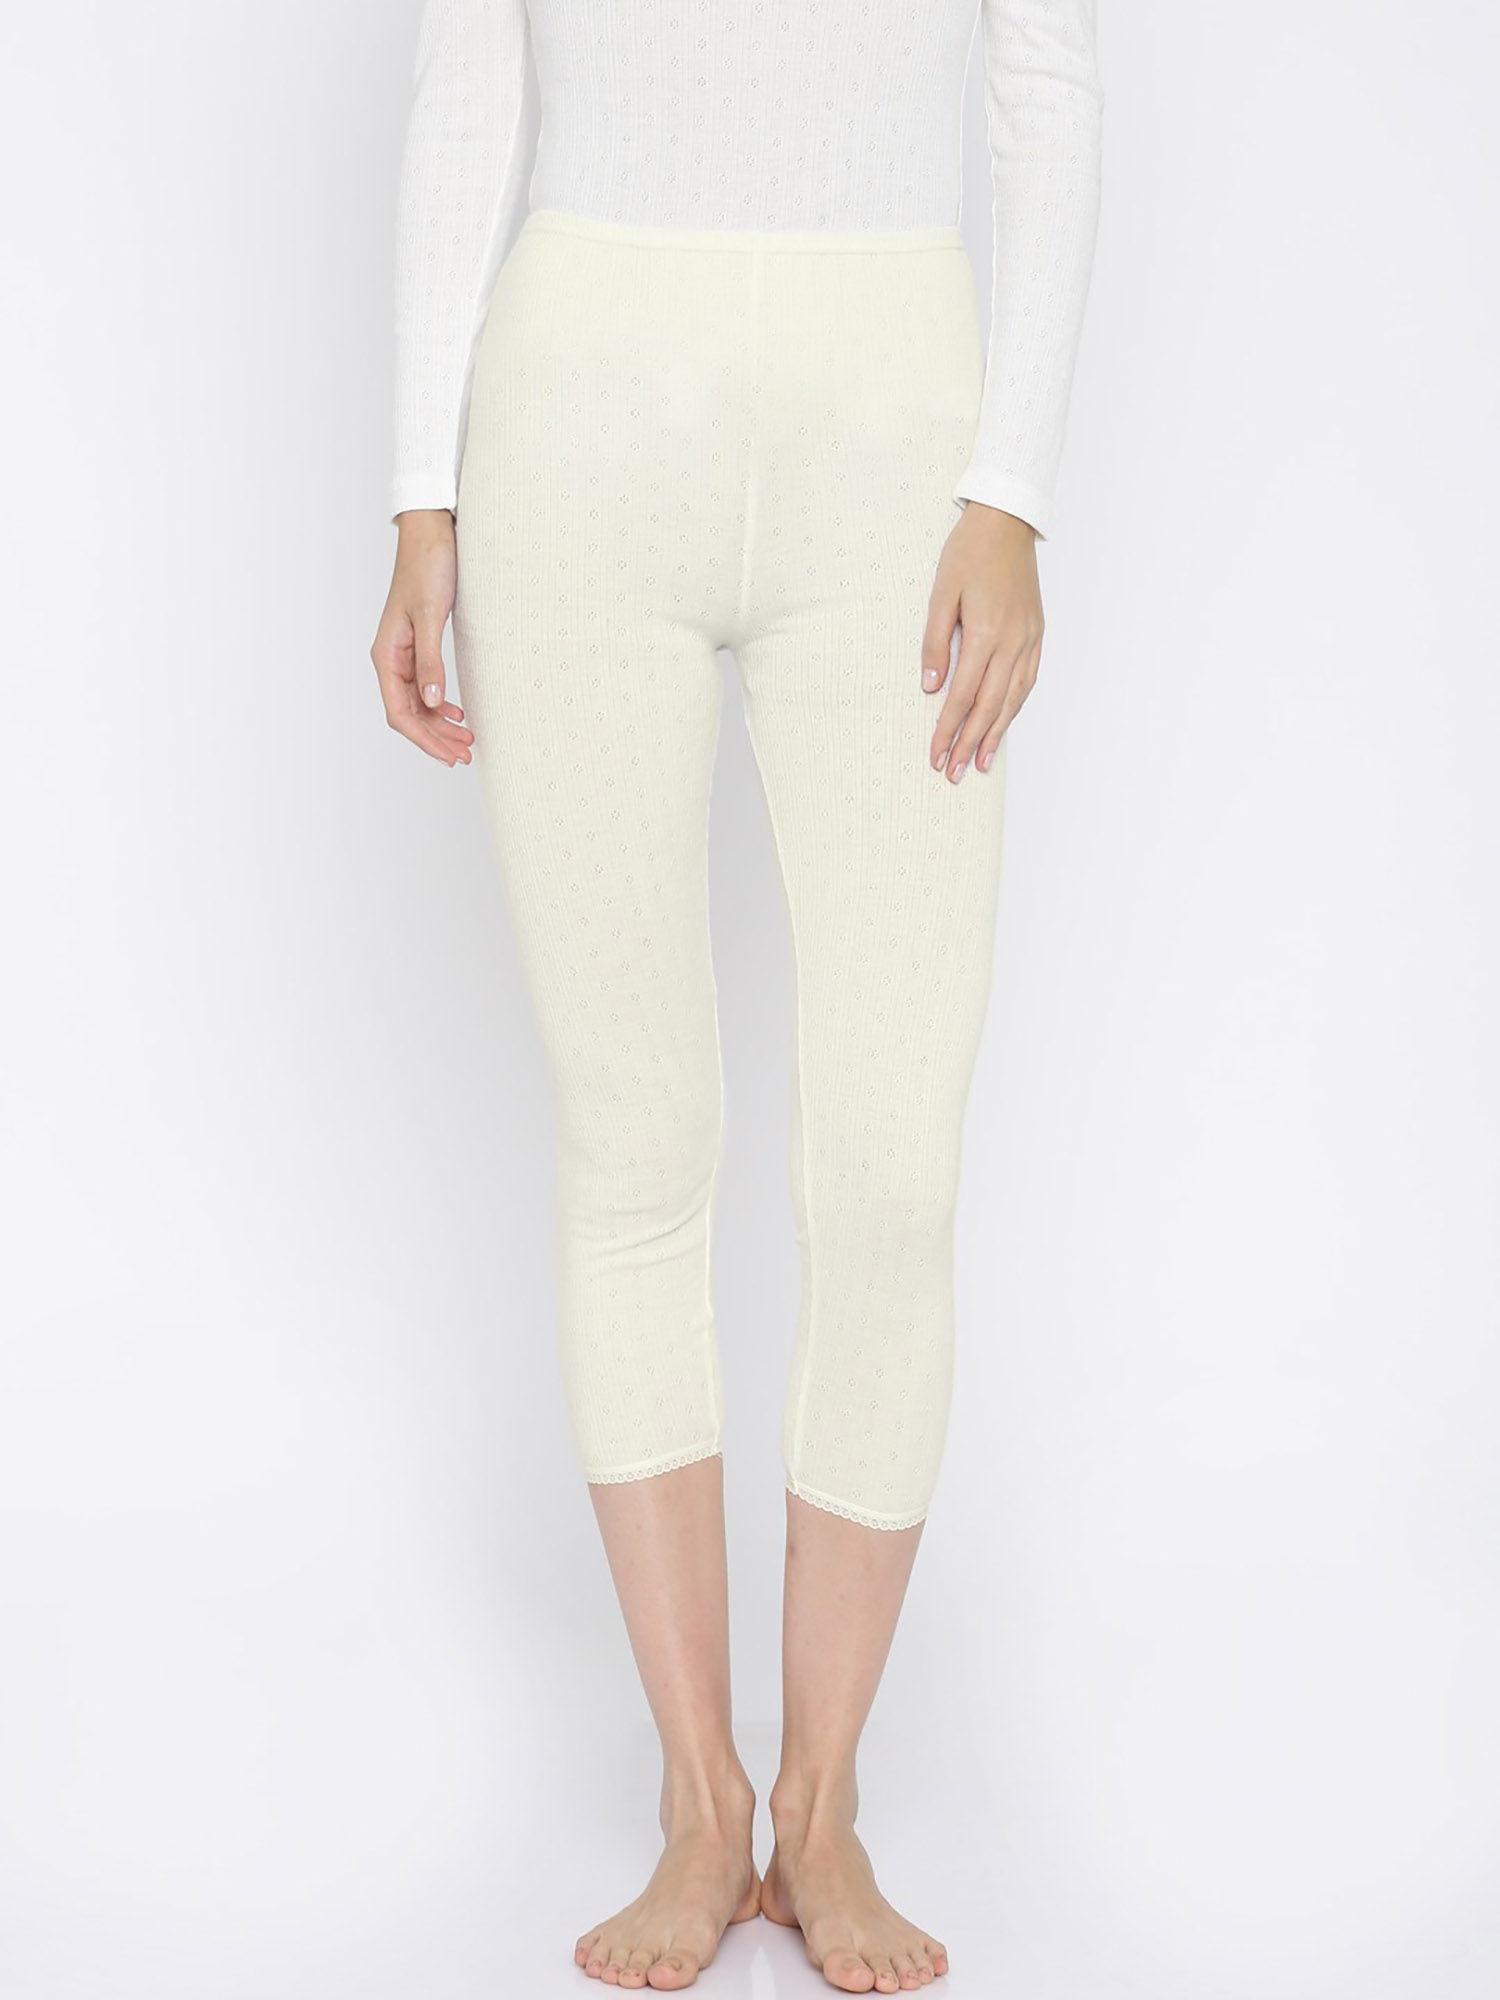 off white patterned thermal leggings